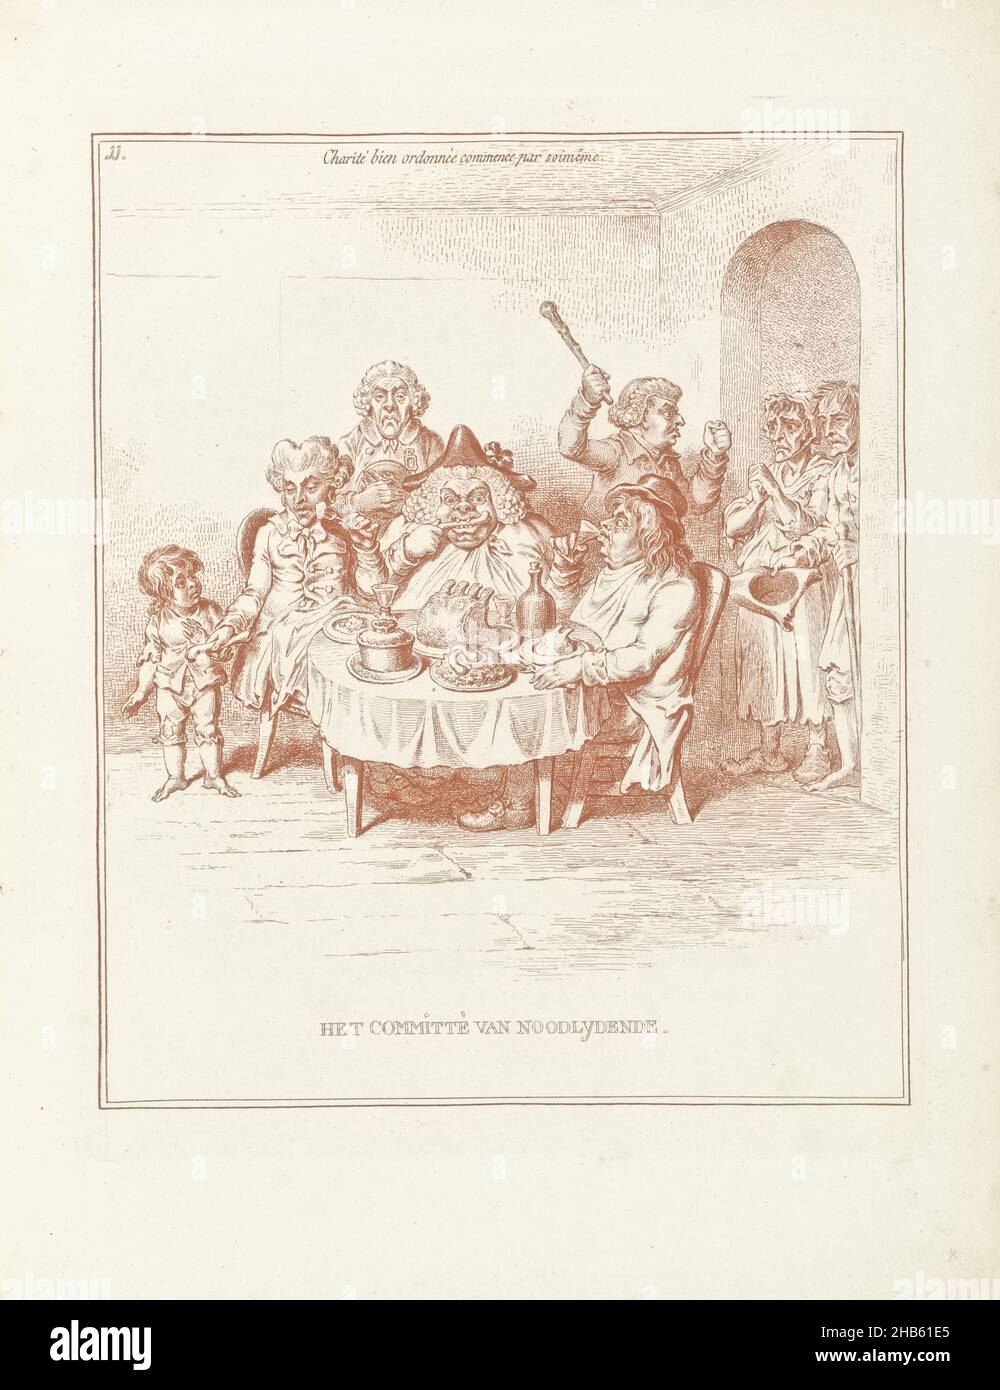 Committee for the Needy, 1795, The Committee for the Needy (title on object), Hollandia Regenerata (series title), Cartoon on the Committee for the Needy, 1795. Members of the committee feast at a table on a rich meal. A begging couple at the door is chased away, on the left a little boy is handed a split bone., print maker: James Gillray (possibly), intermediary draughtsman: David Hess, London, 1795, paper, etching, height 275 mm × width 220 mm Stock Photo